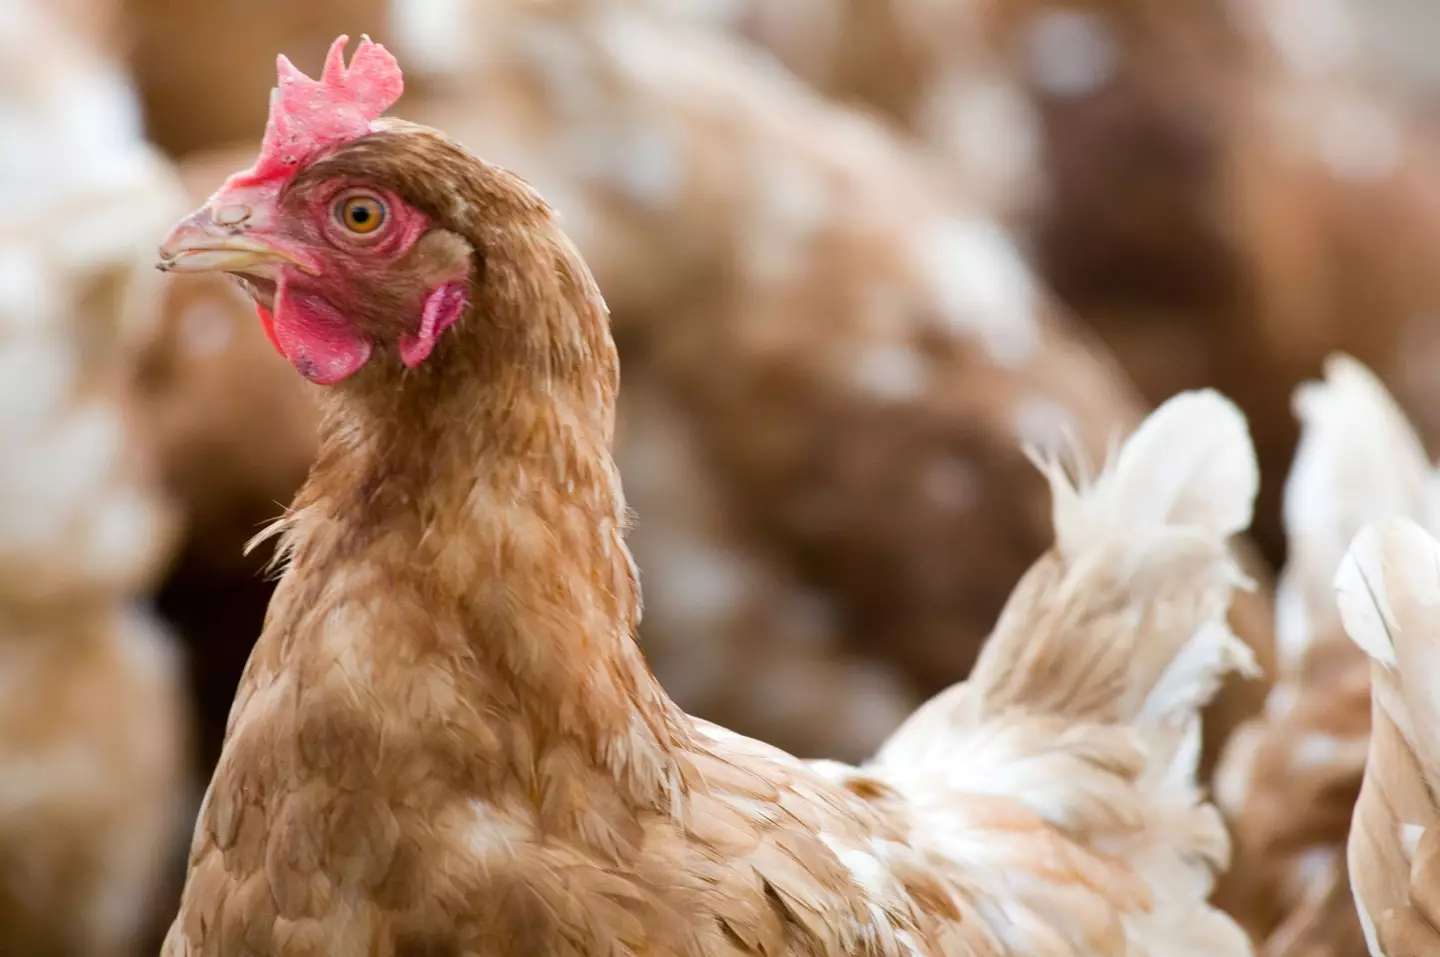 Chicken could soon become as expensive as beef.